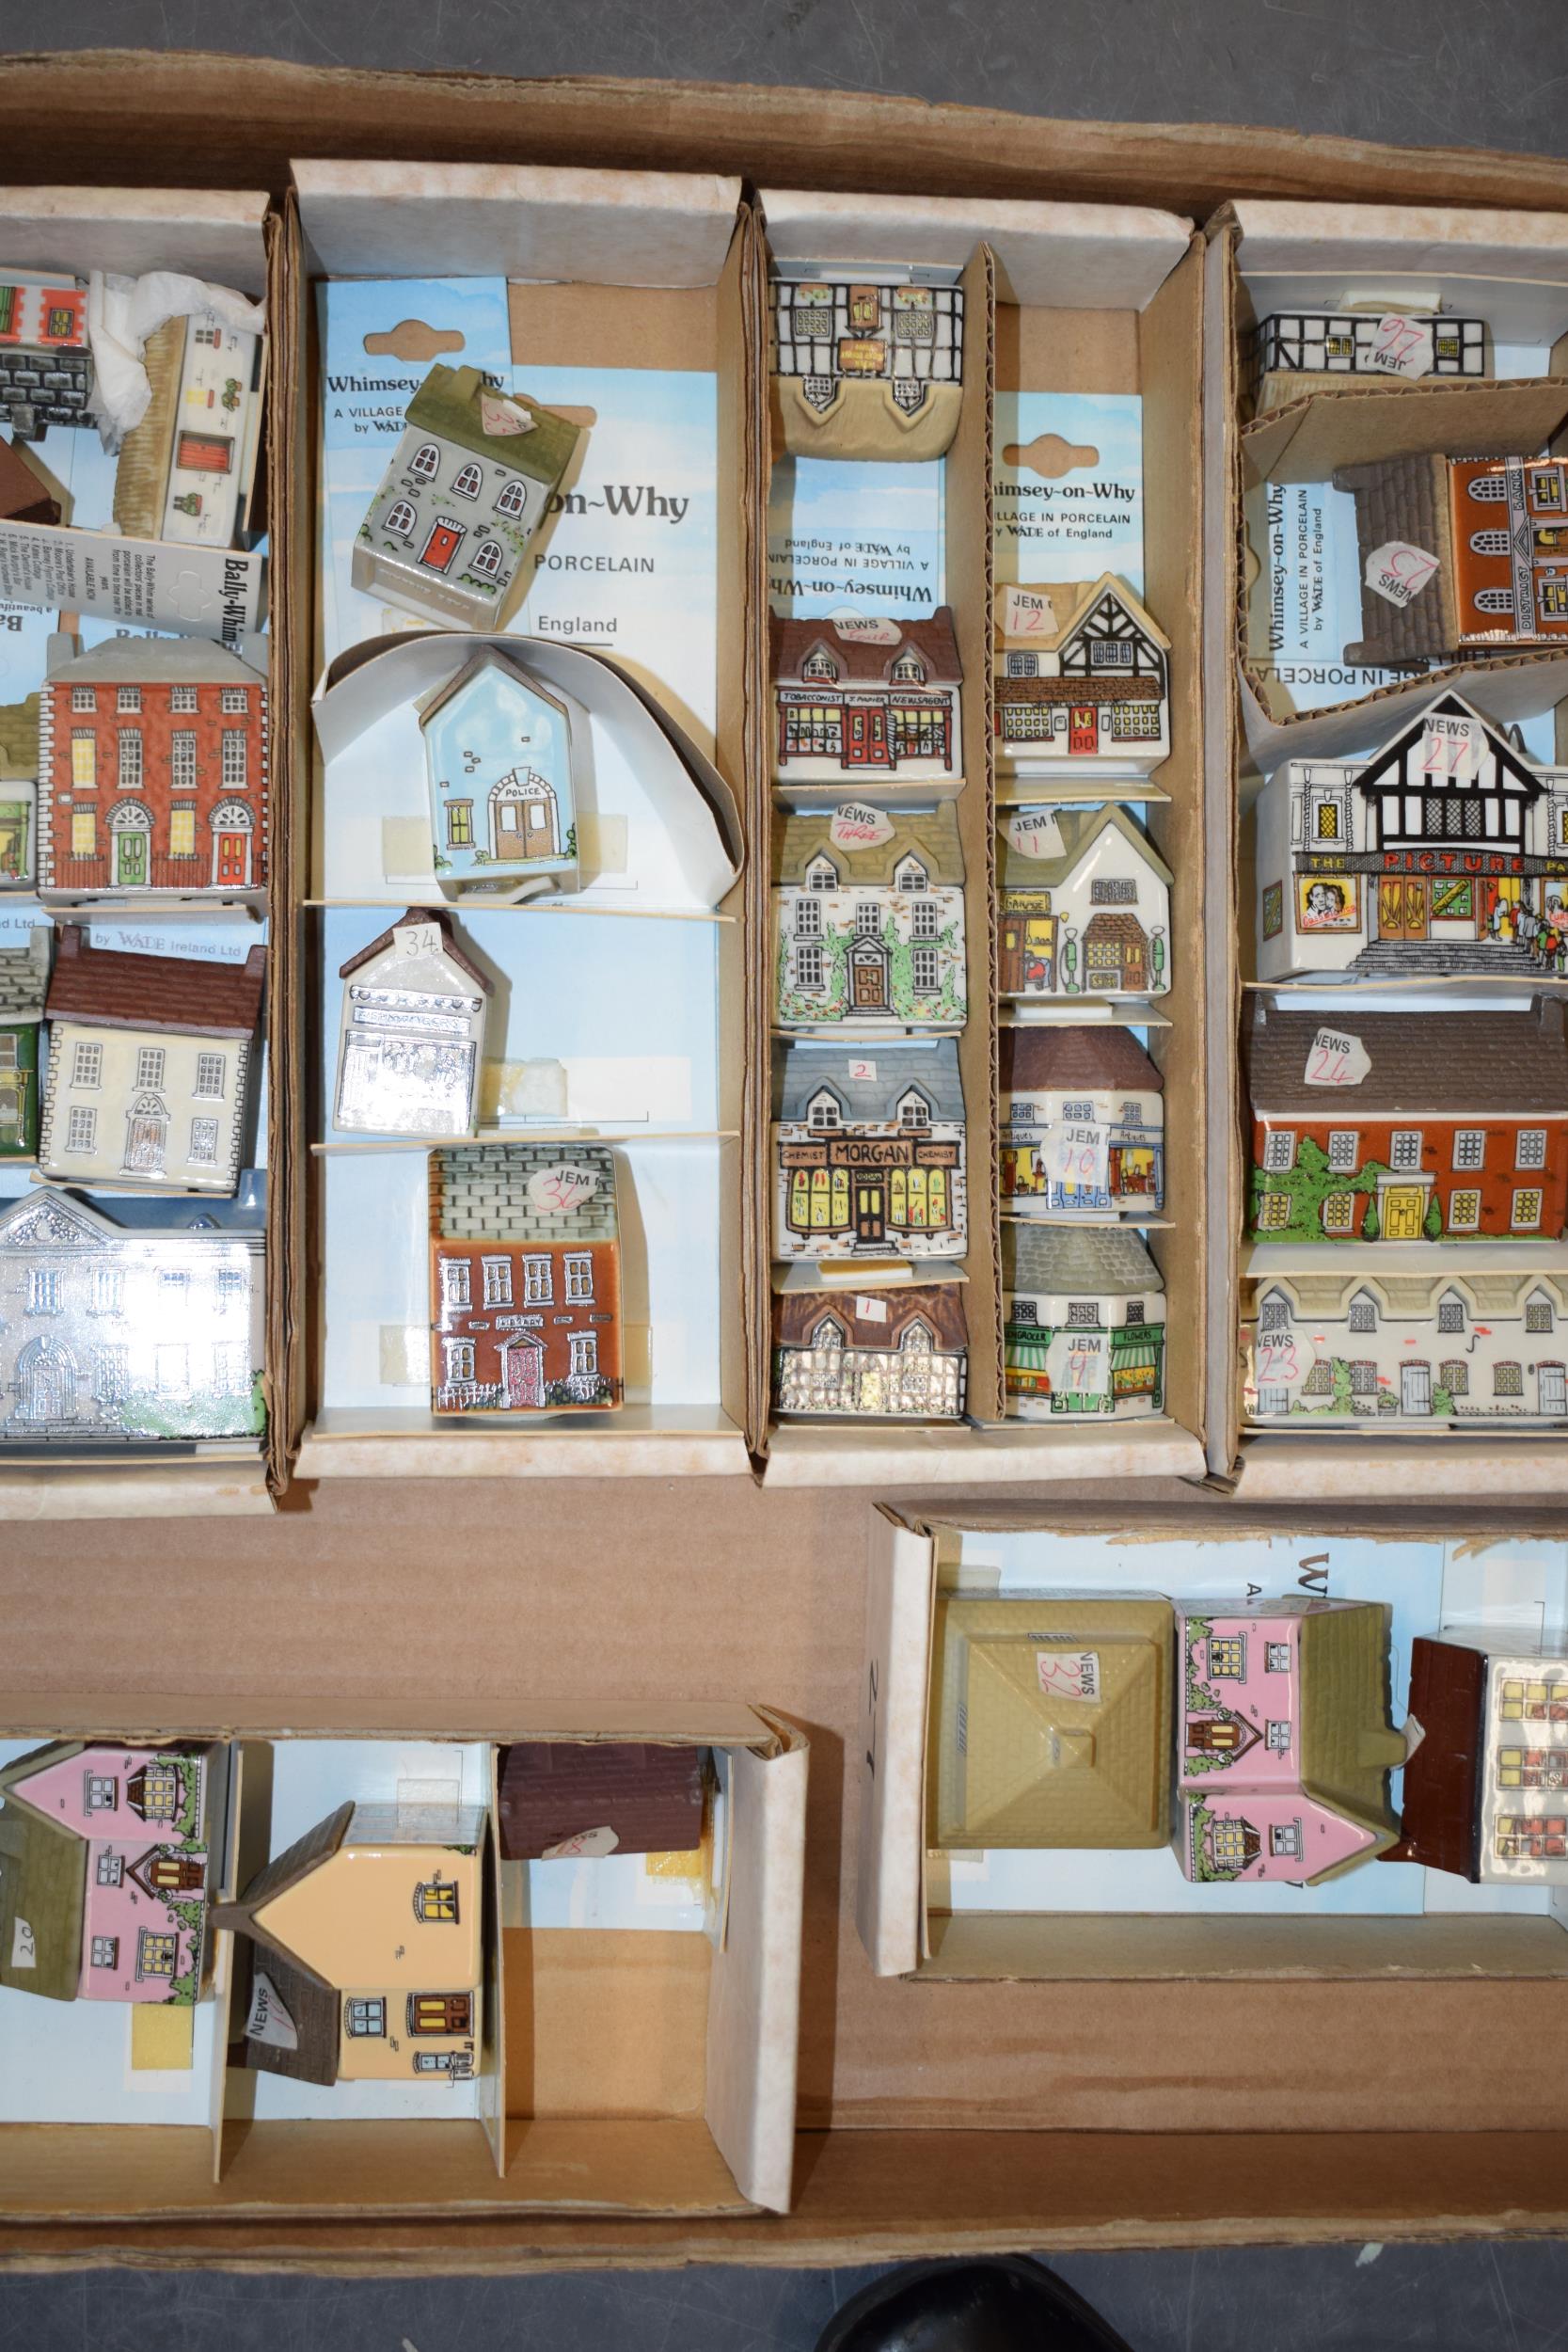 A good collection of Wade buildings to include Whimsey on Why, with paper maps / village layouts, - Image 3 of 5